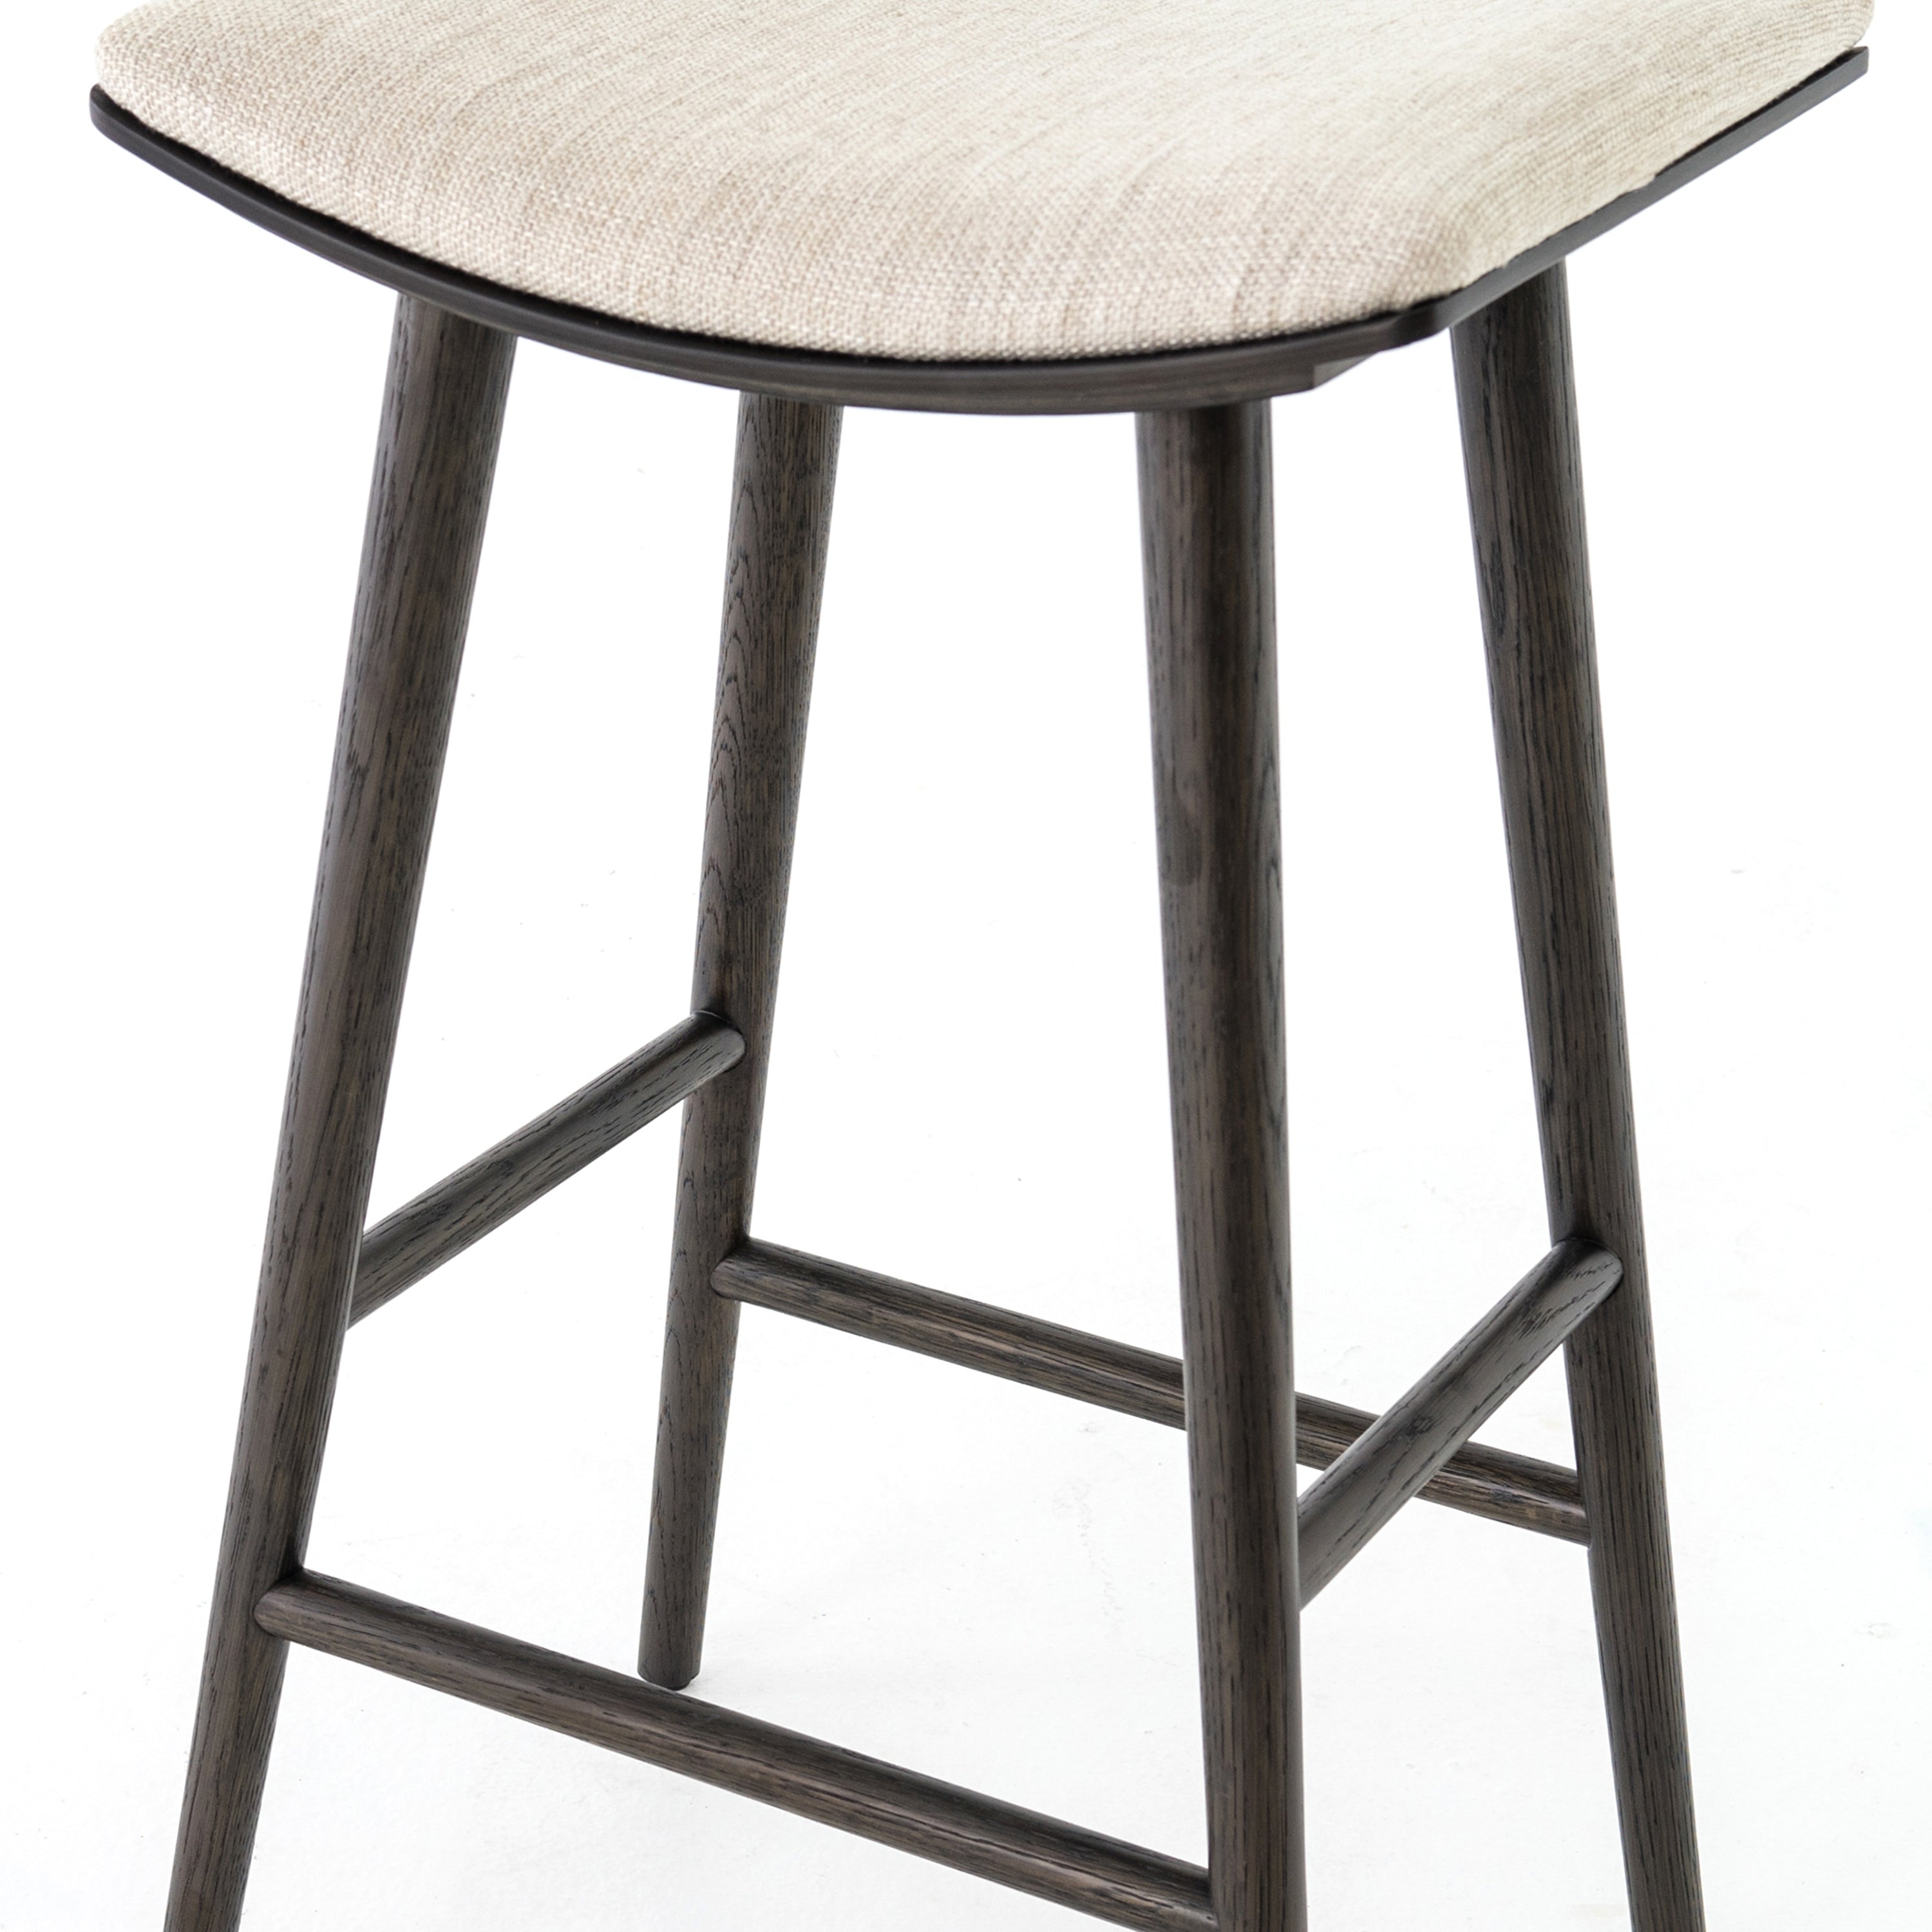 Essence Natural Fabric with Light Carbon Parawood (Bar Height) | Union Bar/Counter Stool | Valley Ridge Furniture